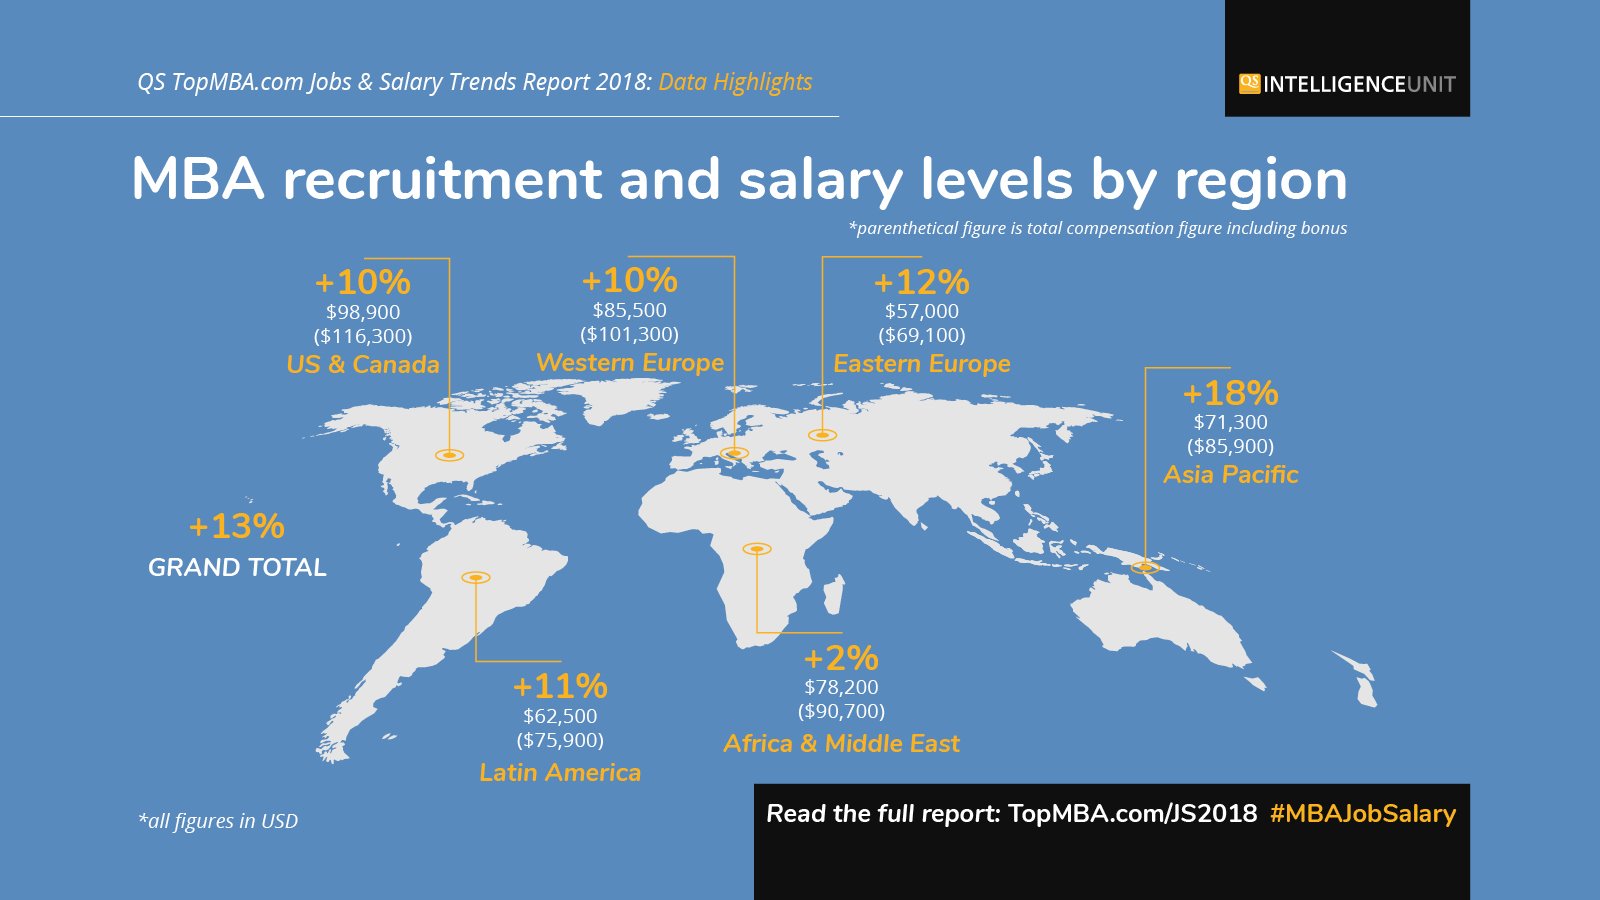 Recruitment and salary levels by region